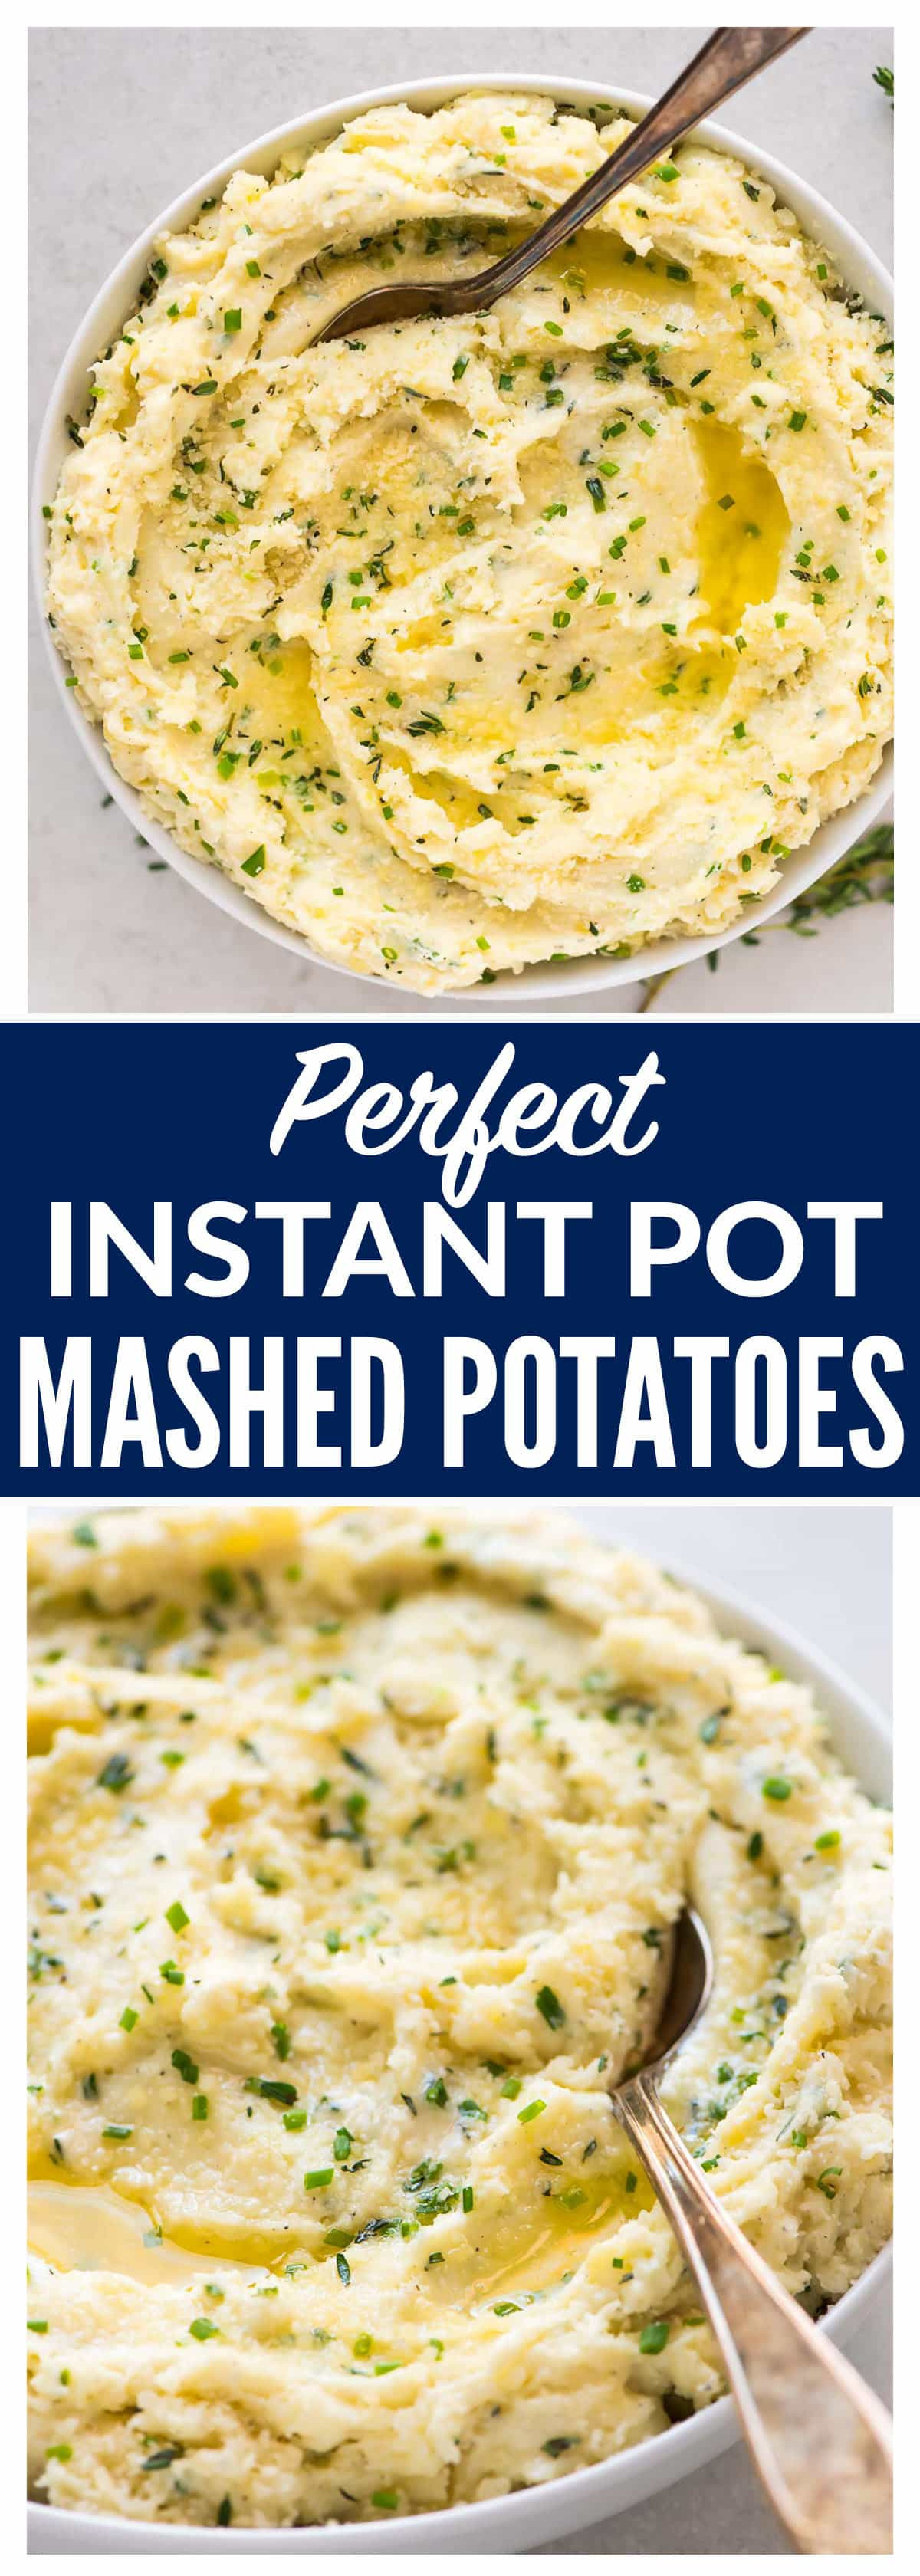 Instant Mashed Potatoes Healthy 20 Ideas for Instant Mashed Potatoes Healthy